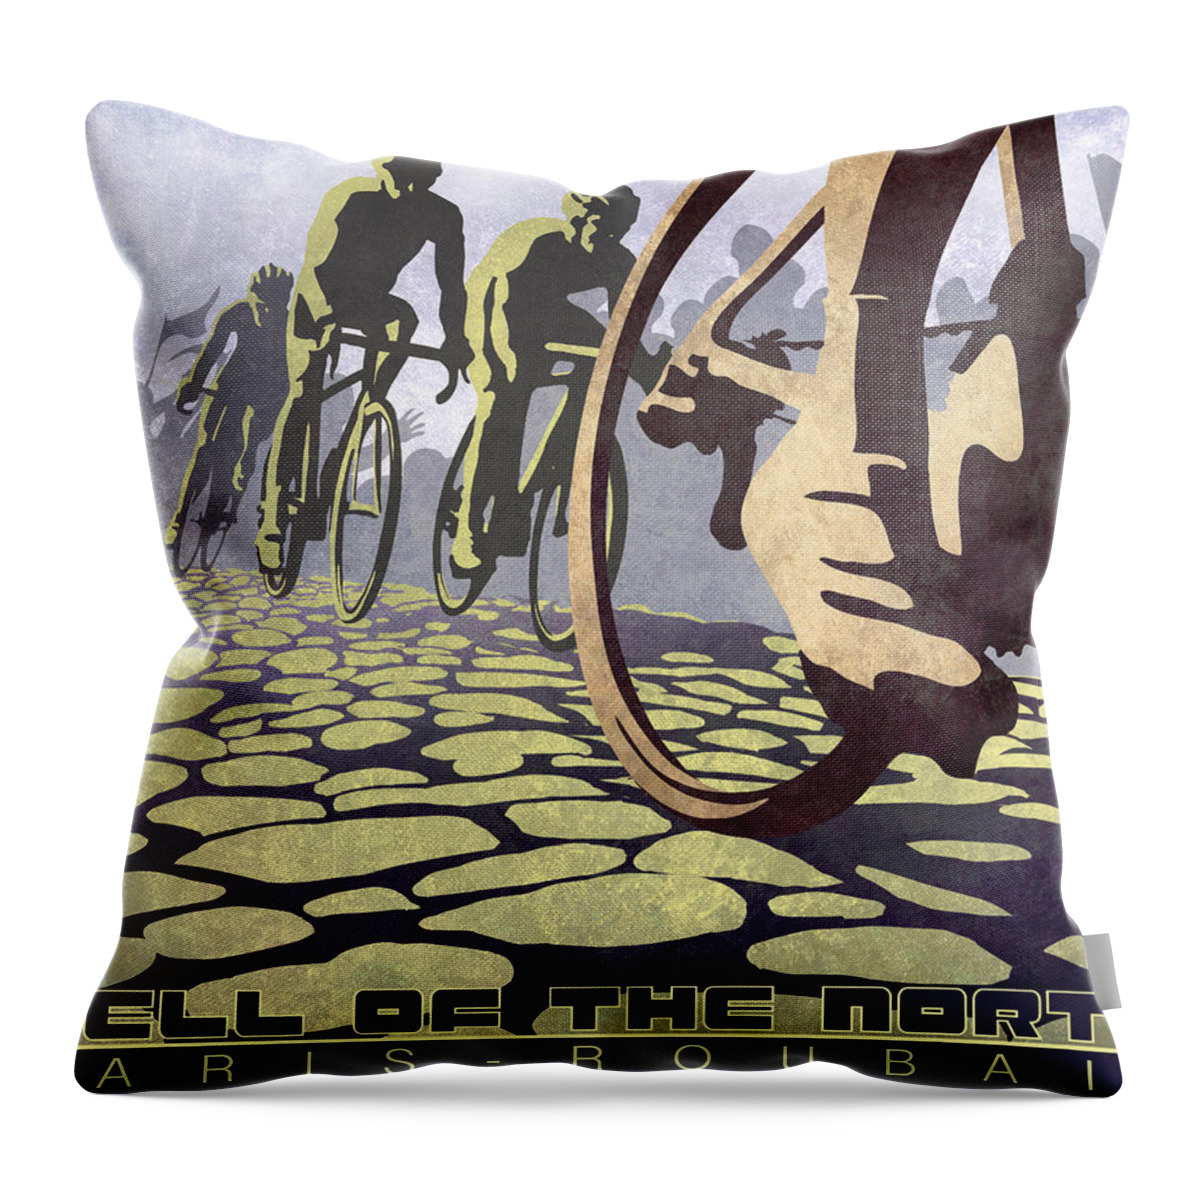 Hell Of The North Retro Cycling Illustration Poster Throw Pillow featuring the painting HELL OF THE NORTH retro cycling illustration poster by Sassan Filsoof